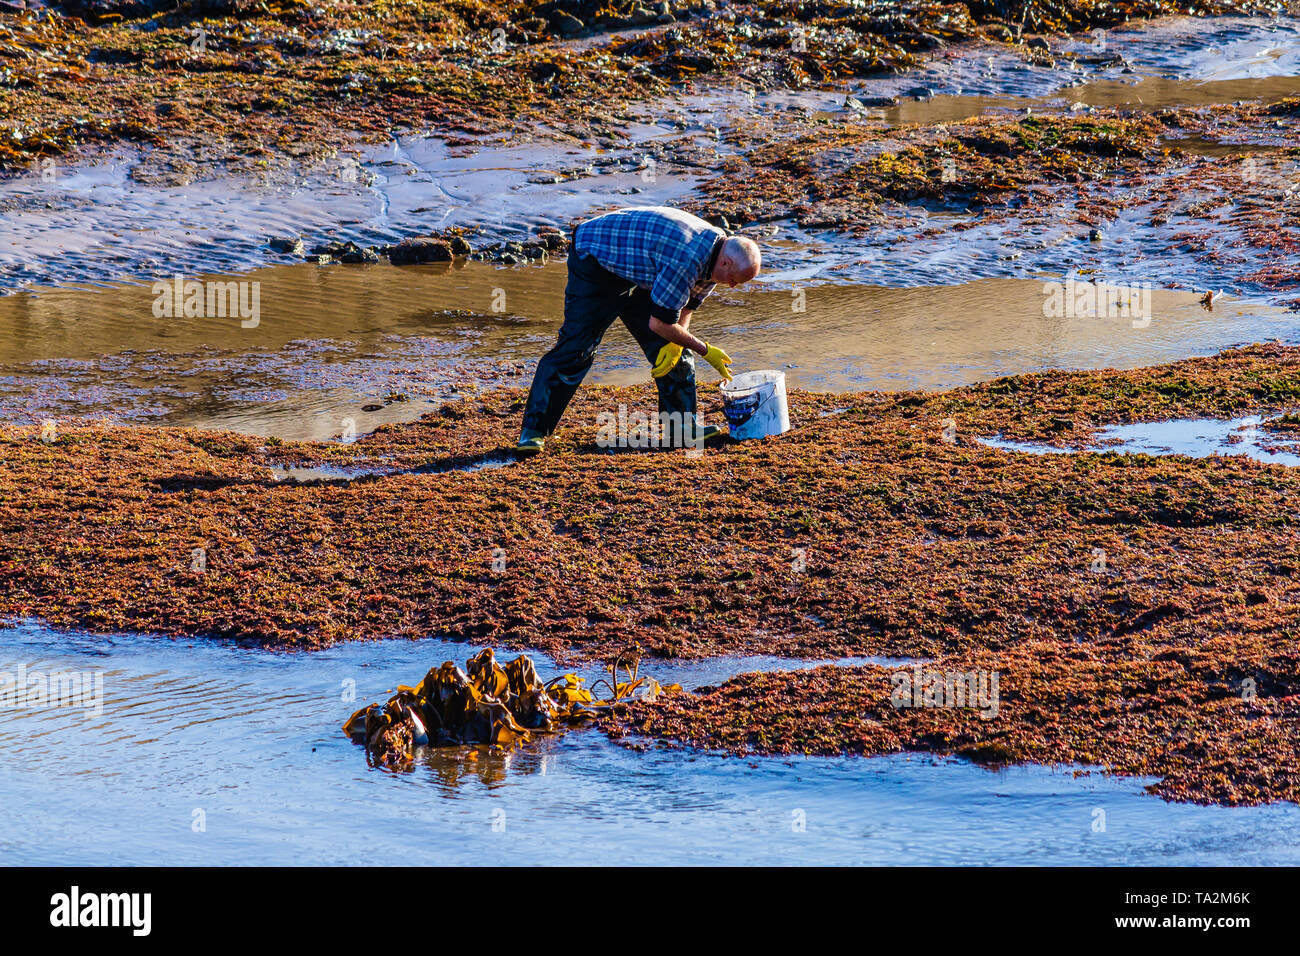 A man gathering shellfish such as whelks and periwinkles by hand at low tide in Seahouses, Northumberland, UK. October 2018. Stock Photo